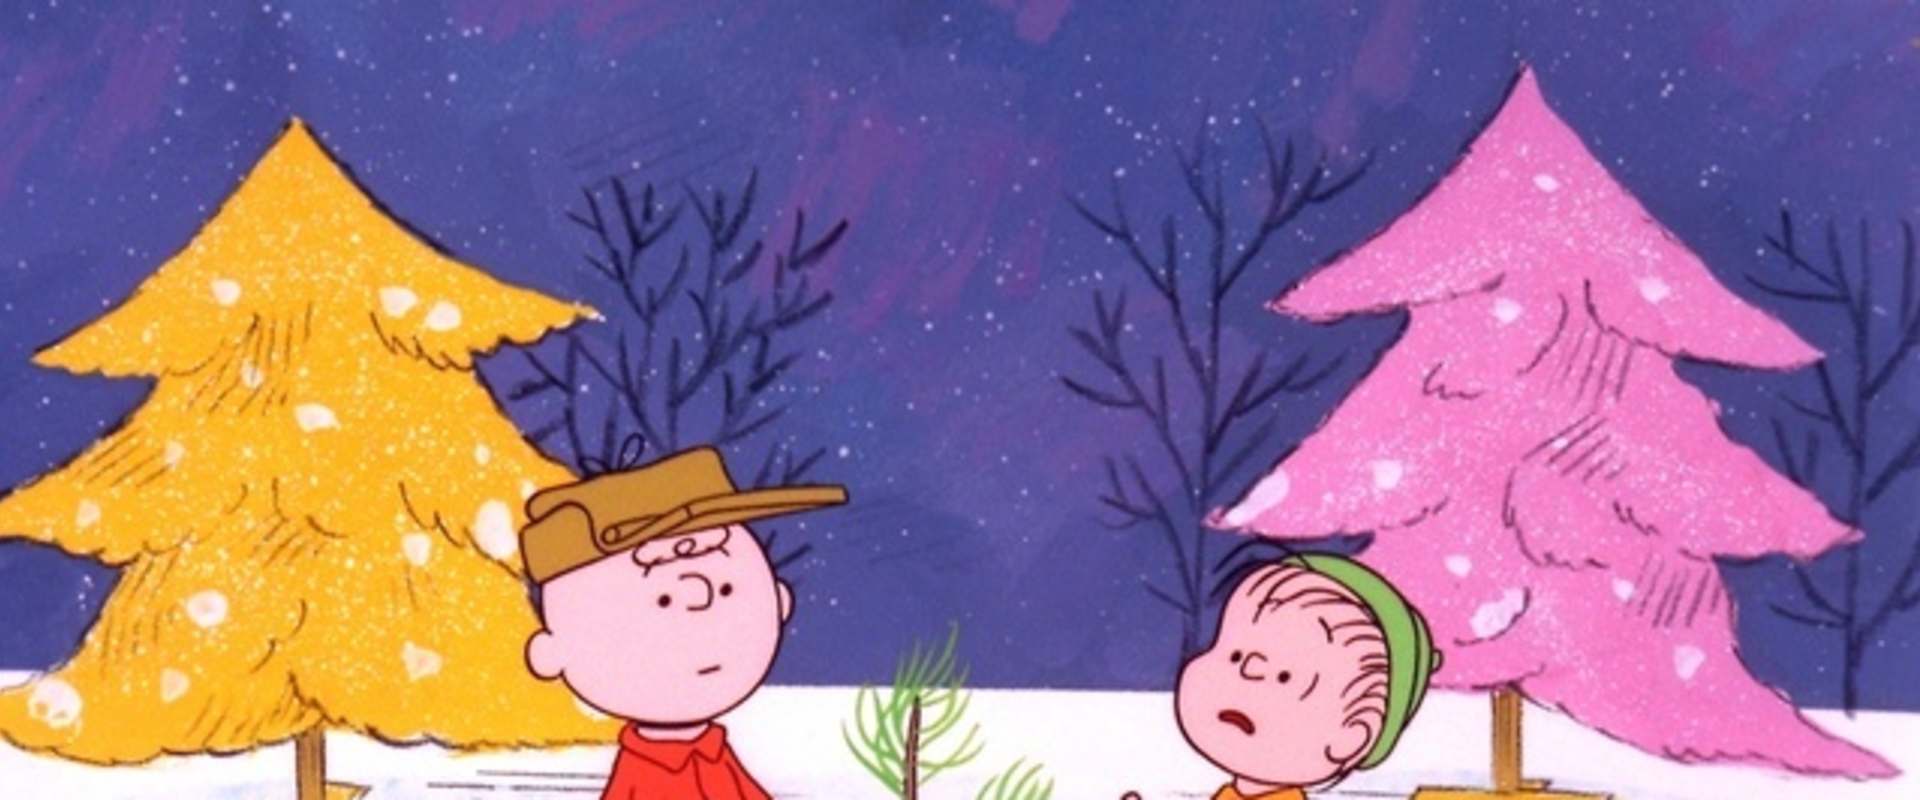 A Charlie Brown Christmas background 2